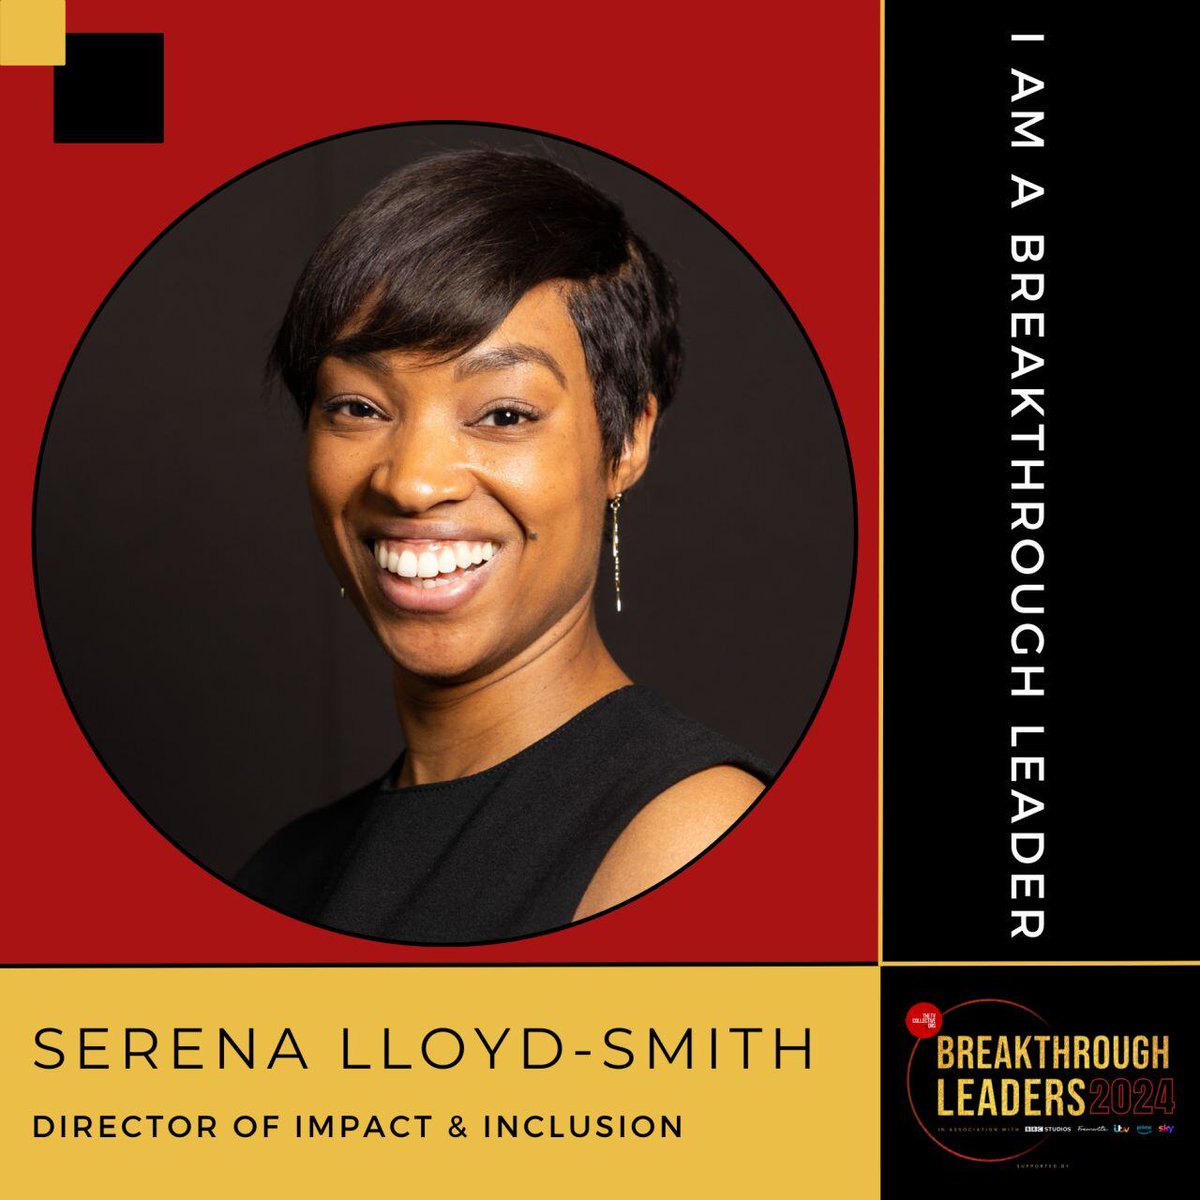 Congratulations to IMG’s Serena Lloyd-Smith, who has been included in @TheTVCollective's Breakthrough Leaders of 2024, celebrating 50 outstanding individuals from Black, Asian, and global majority backgrounds, set to lead the U.K. TV industry. Read more: bit.ly/4dEsol8